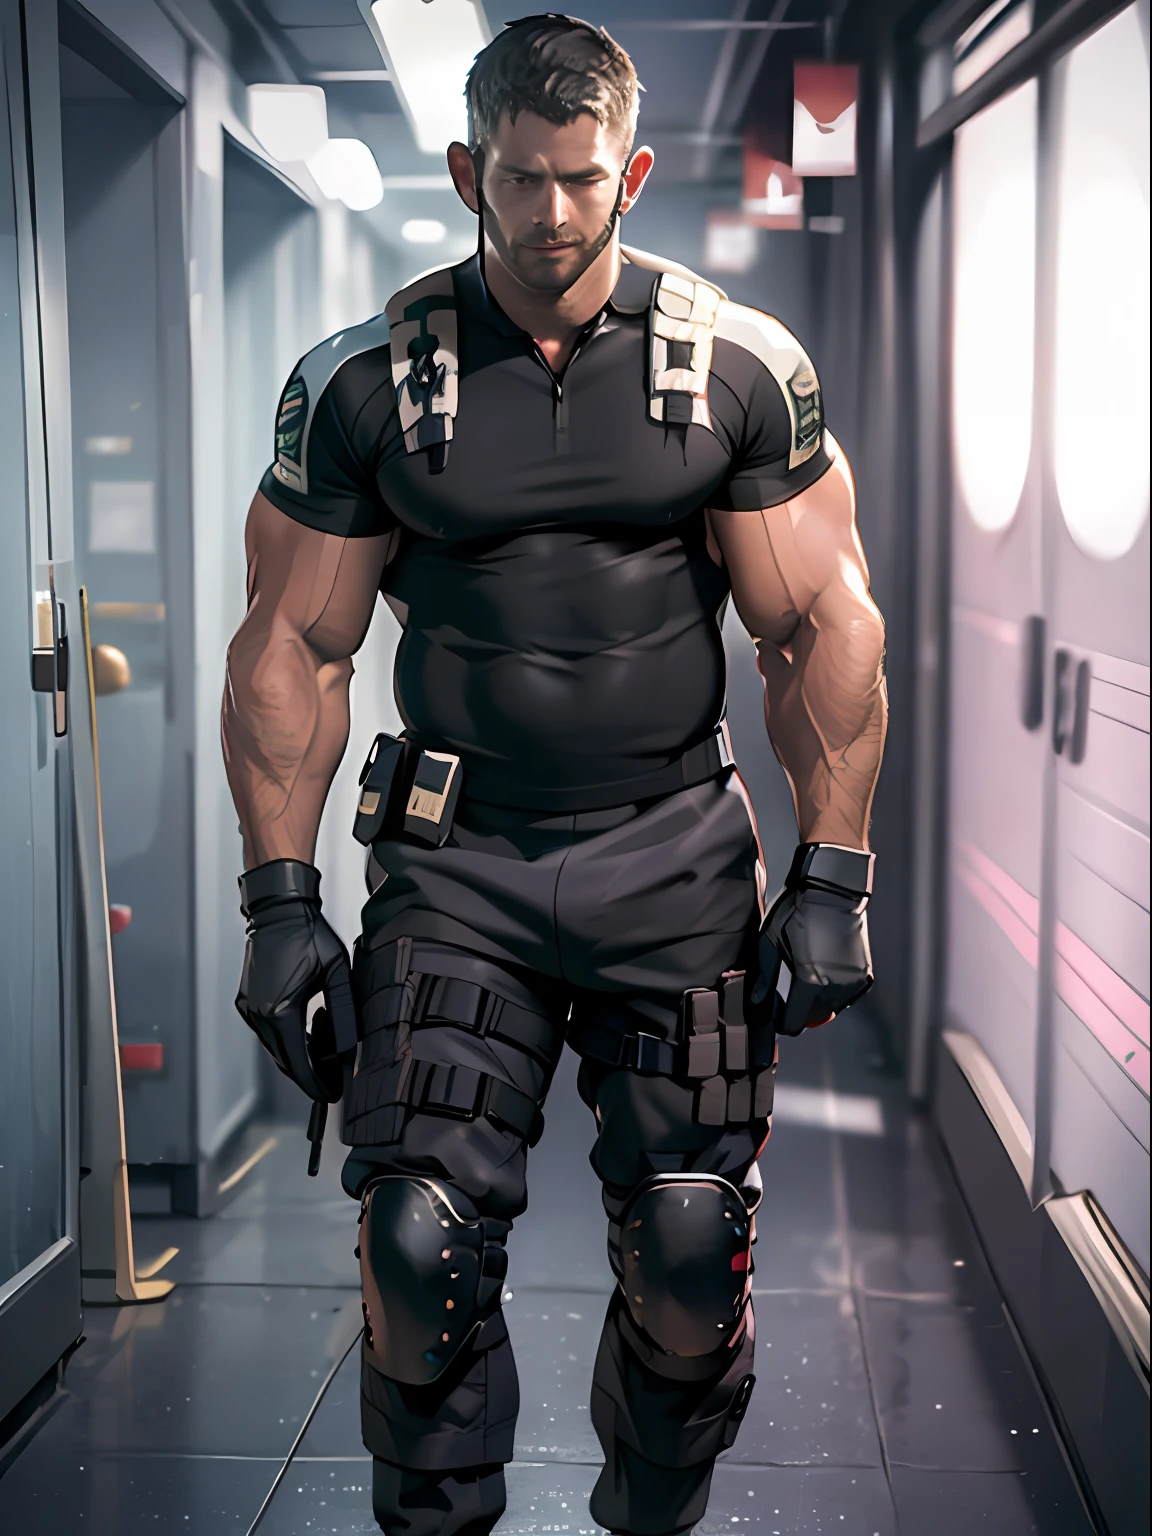 1male people， full bodyesbian，solo， 35yo，One meter 85 Chris Redfield， of a shirtless， There are a large number of black tattoos on the upper body，Bad laughs， There is a black muscle tights on the abdomen，Black double-buting sports panties， Tall and burly， biceps， abs， boobgasm，The legs are muscular，Black tight muscle metal leg guards，Black Special Forces tactical gloves， best qualtiy， Black sport socks，tmasterpiece， A high resolution：1.2， full body shot shot， dark black gloomy hallway in the background， Detailed face， shadowing， Volumetriclighting， Center focus， low camera angle